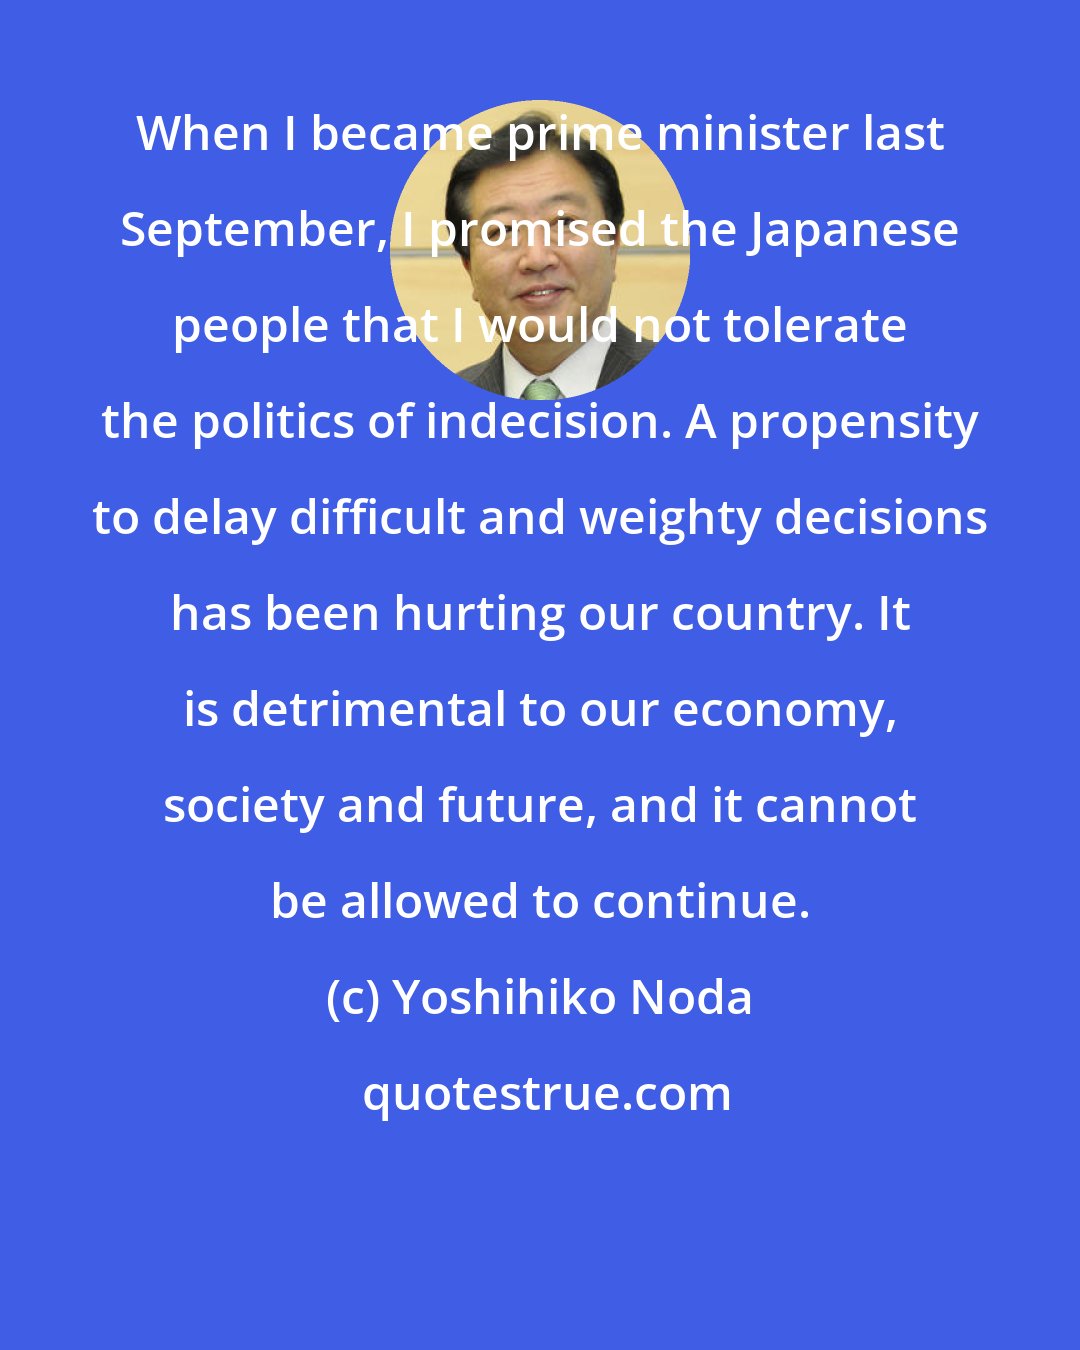 Yoshihiko Noda: When I became prime minister last September, I promised the Japanese people that I would not tolerate the politics of indecision. A propensity to delay difficult and weighty decisions has been hurting our country. It is detrimental to our economy, society and future, and it cannot be allowed to continue.